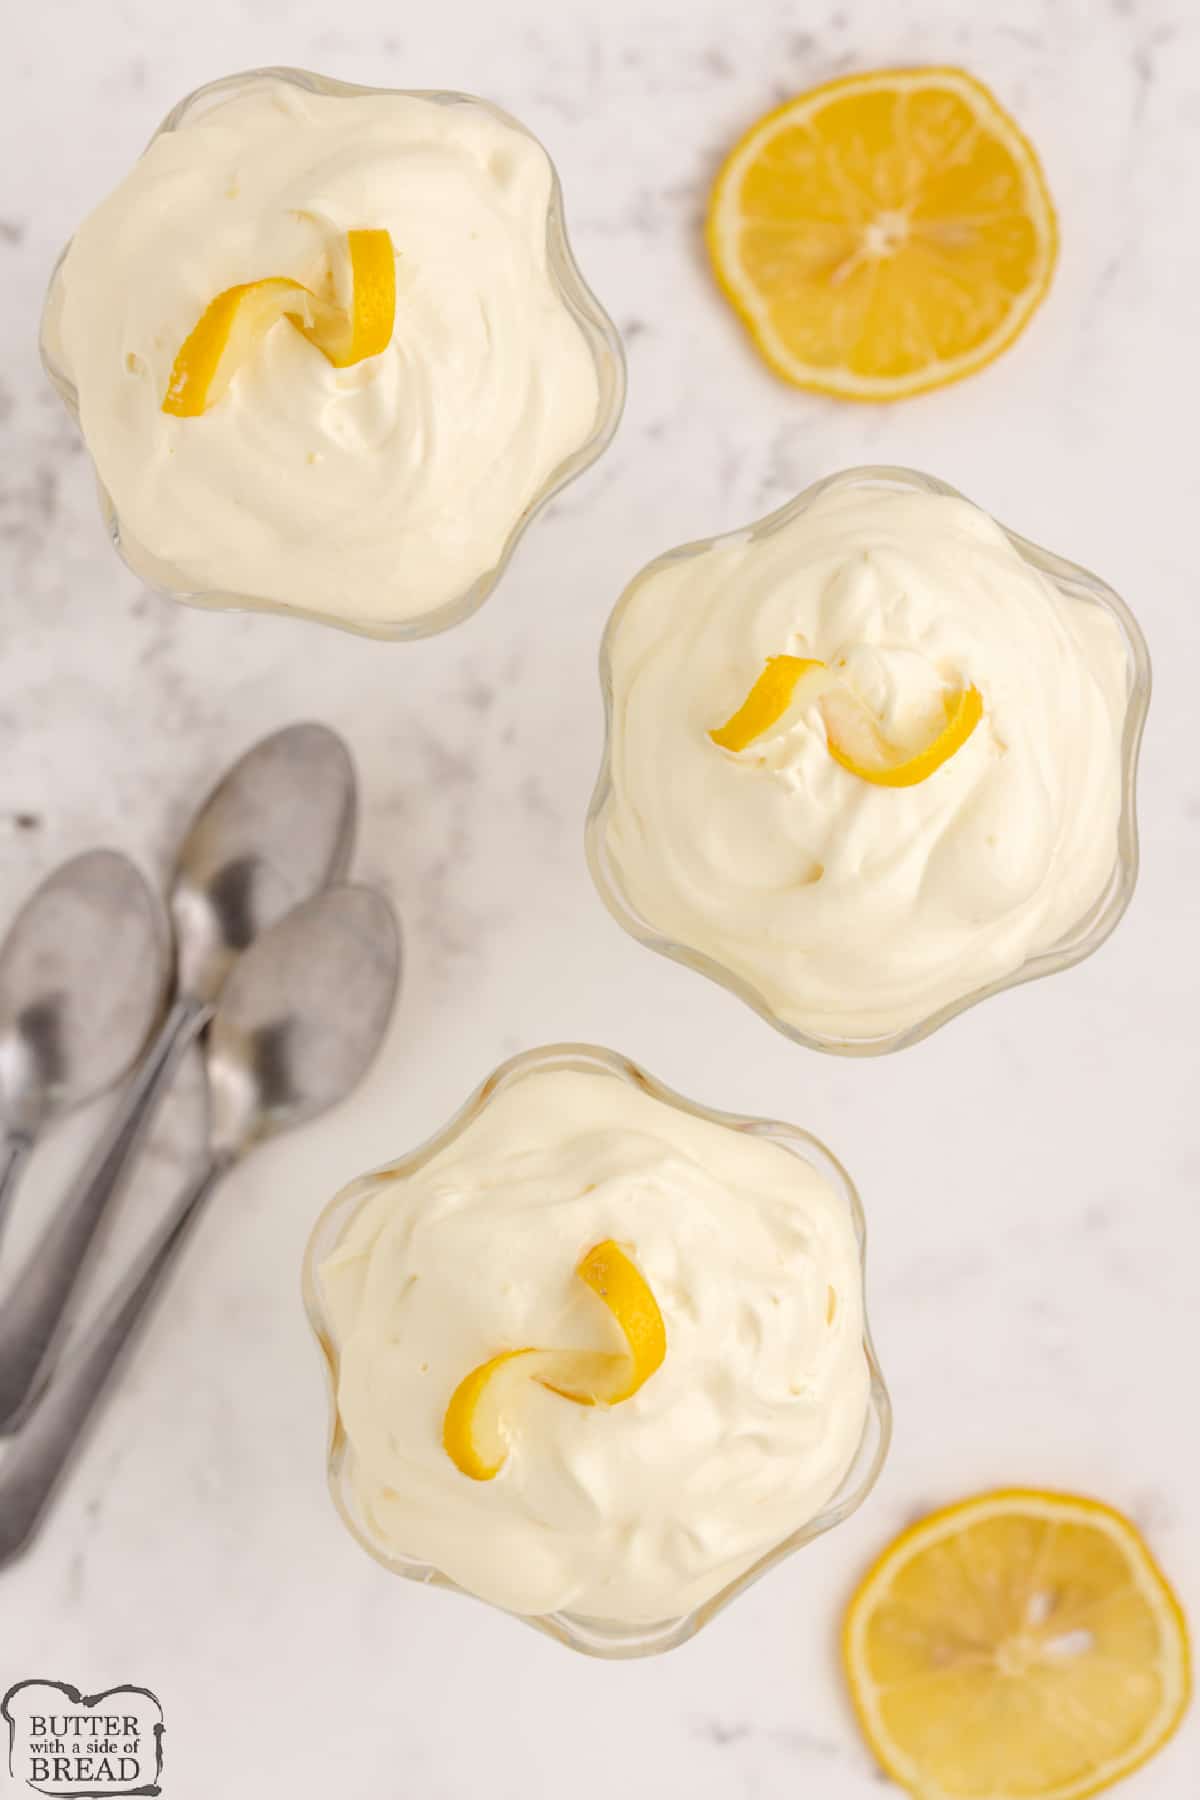 Creamy Lemon Jello made with just 3 ingredients! Easy Jello recipe made with jello, vanilla pudding and whipped topping for a simple and delicious dessert.